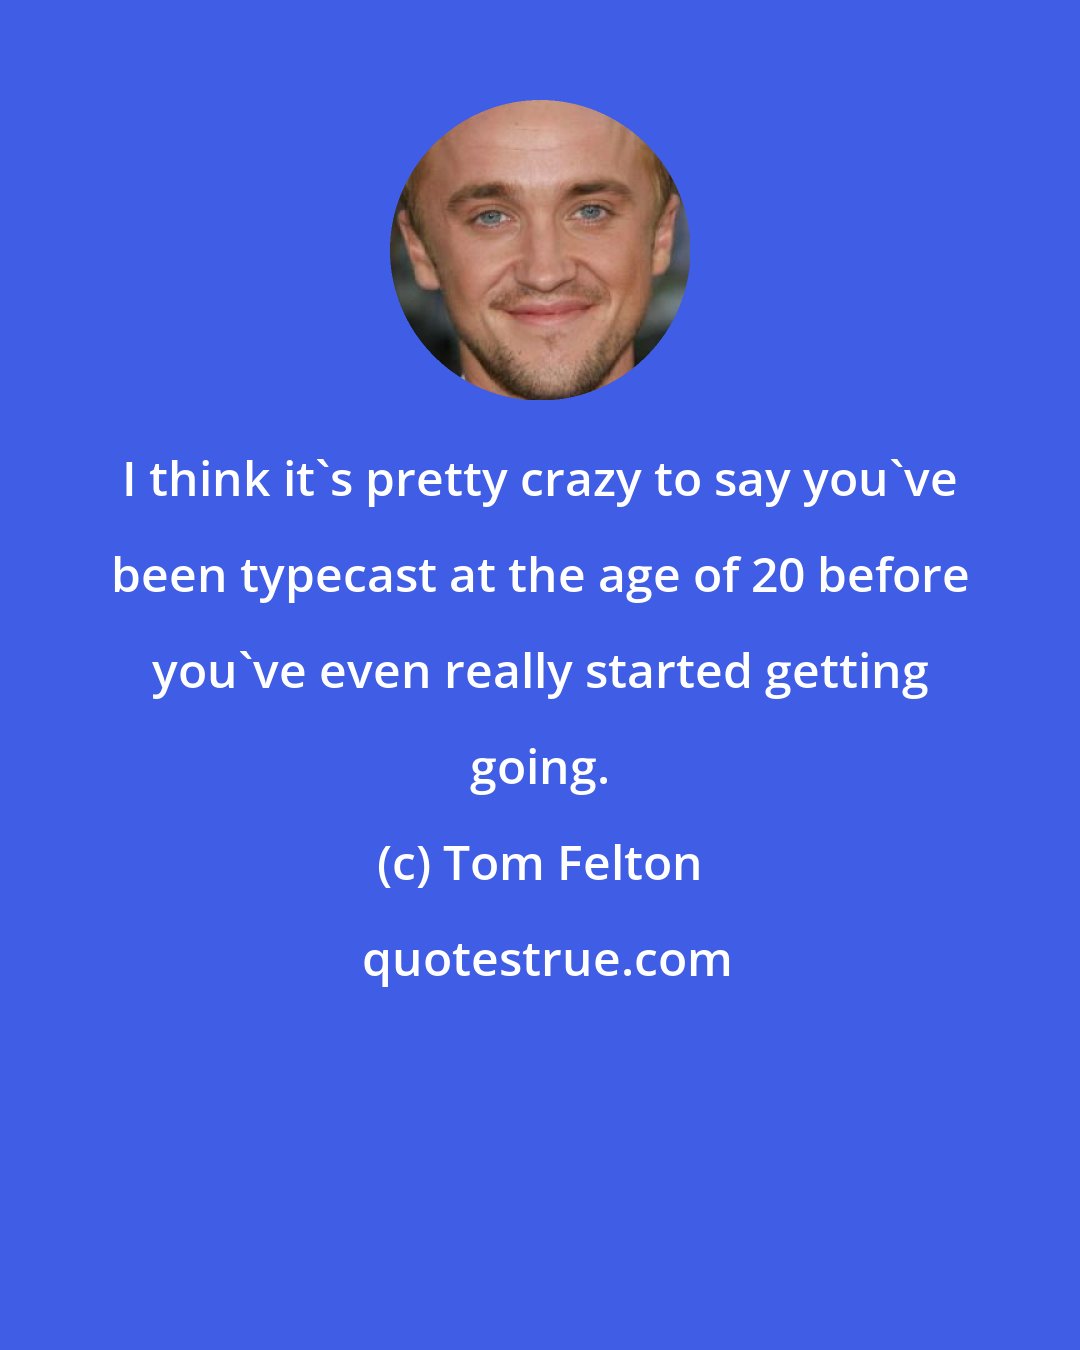 Tom Felton: I think it's pretty crazy to say you've been typecast at the age of 20 before you've even really started getting going.